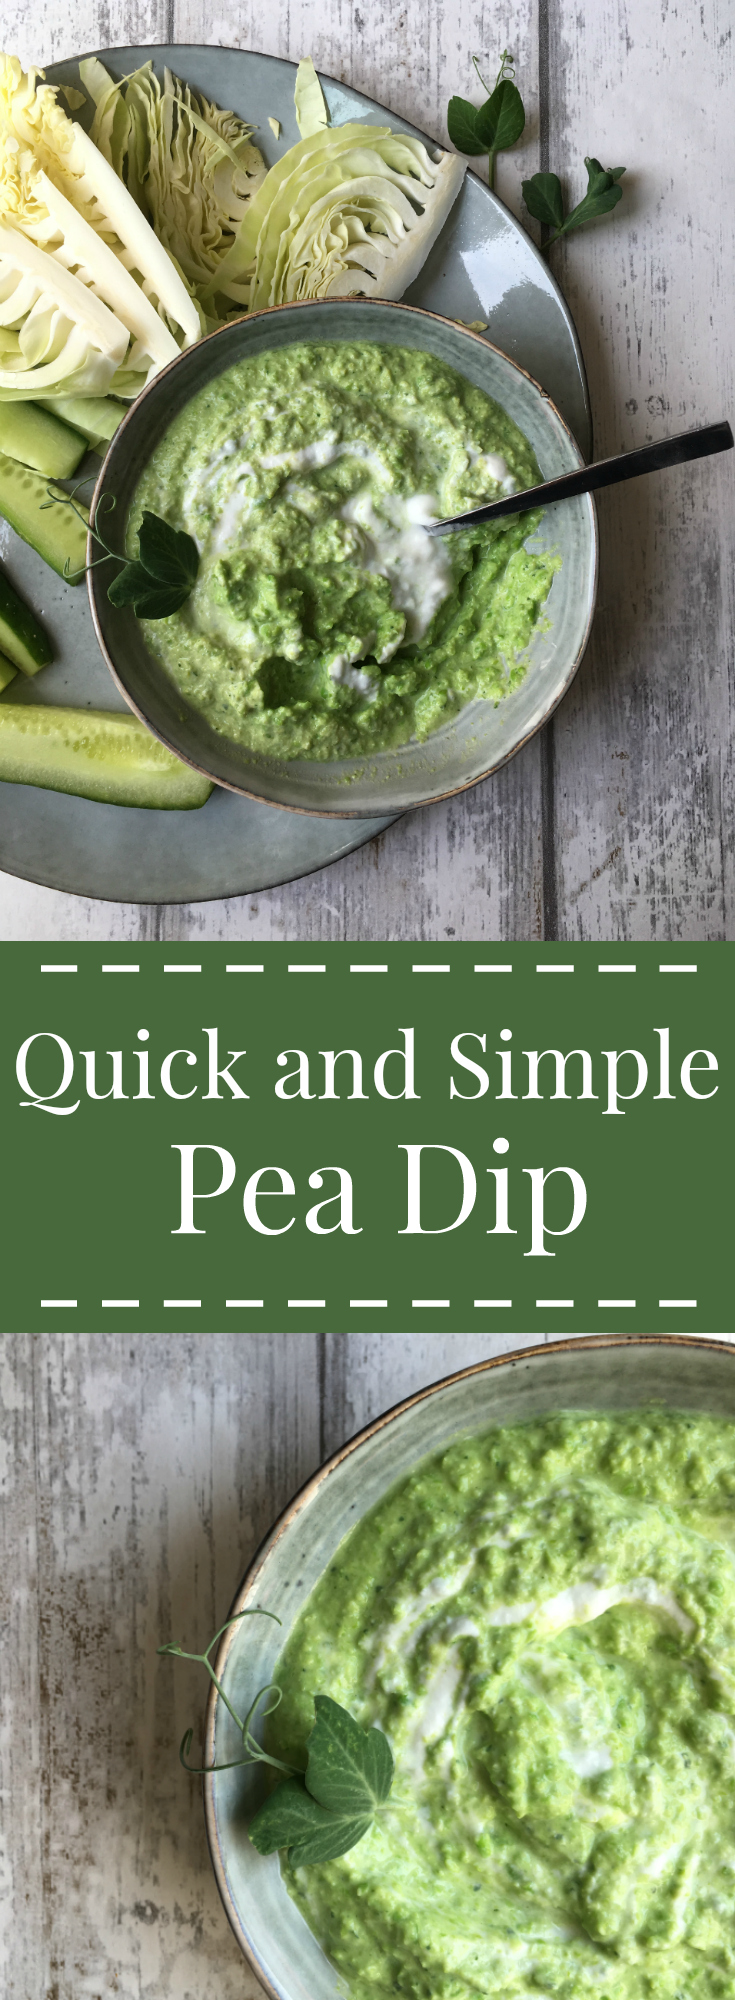 Quick and Simple Pea Dip recipe - Pin it for later :D